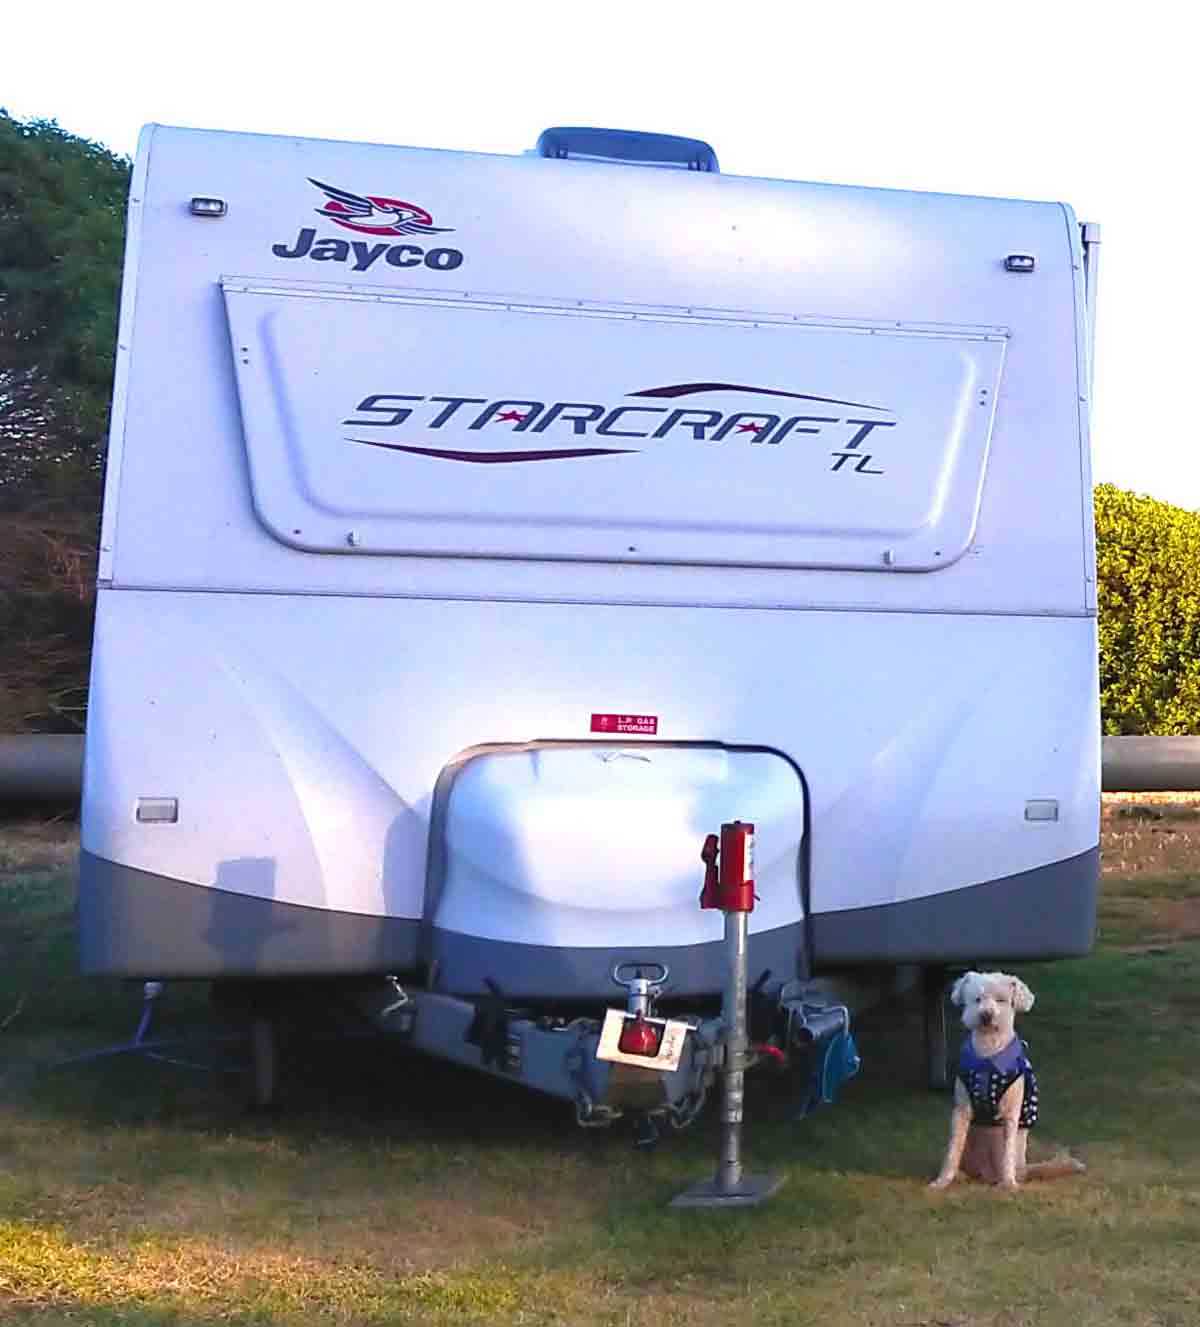 Charlie standing in front of the caravan. Located in Port Lincoln, Eyre Peninsula, South Australia.